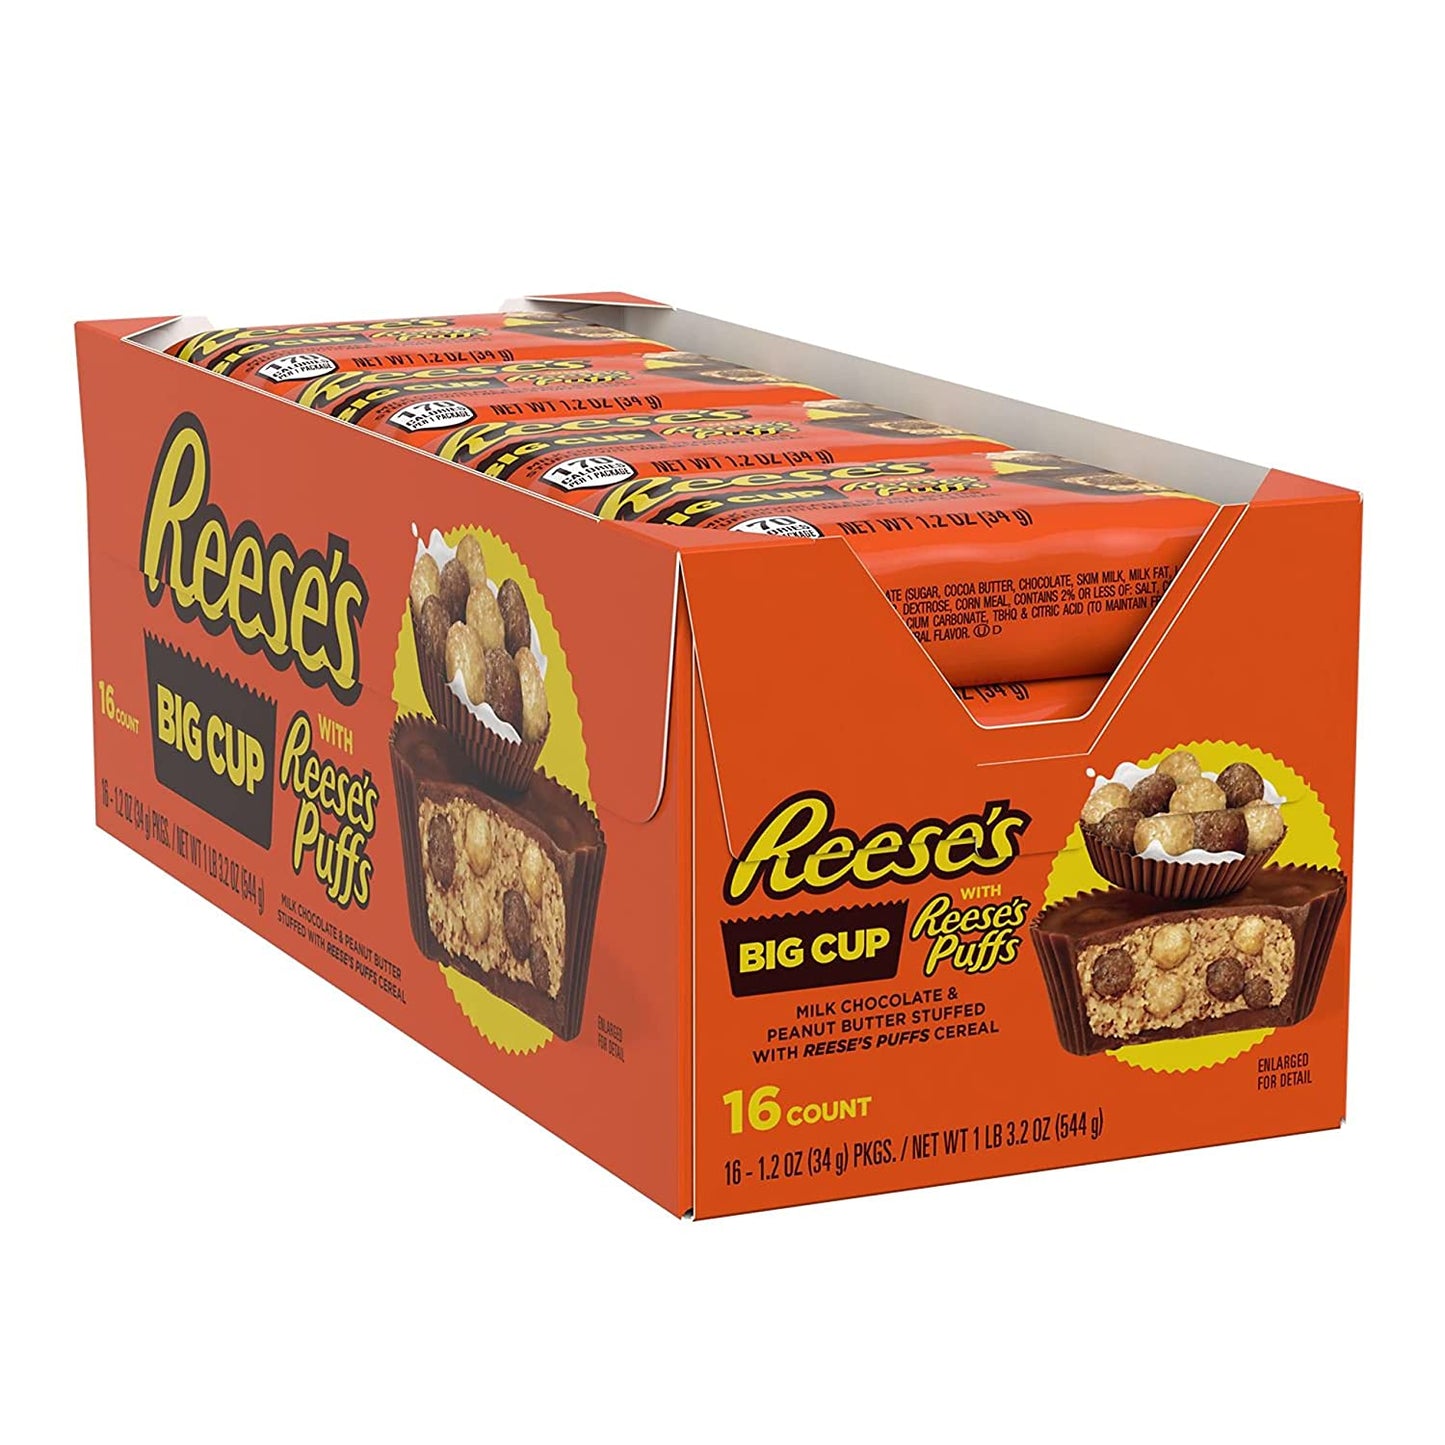 REESE'S STUFFED WITH REESE'S PUFFS CEREAL Big Cup Milk Chocolate Peanut Butter Cups Candy, Gluten Free, 1.2 oz Packs (16 Count) WHOLESALE